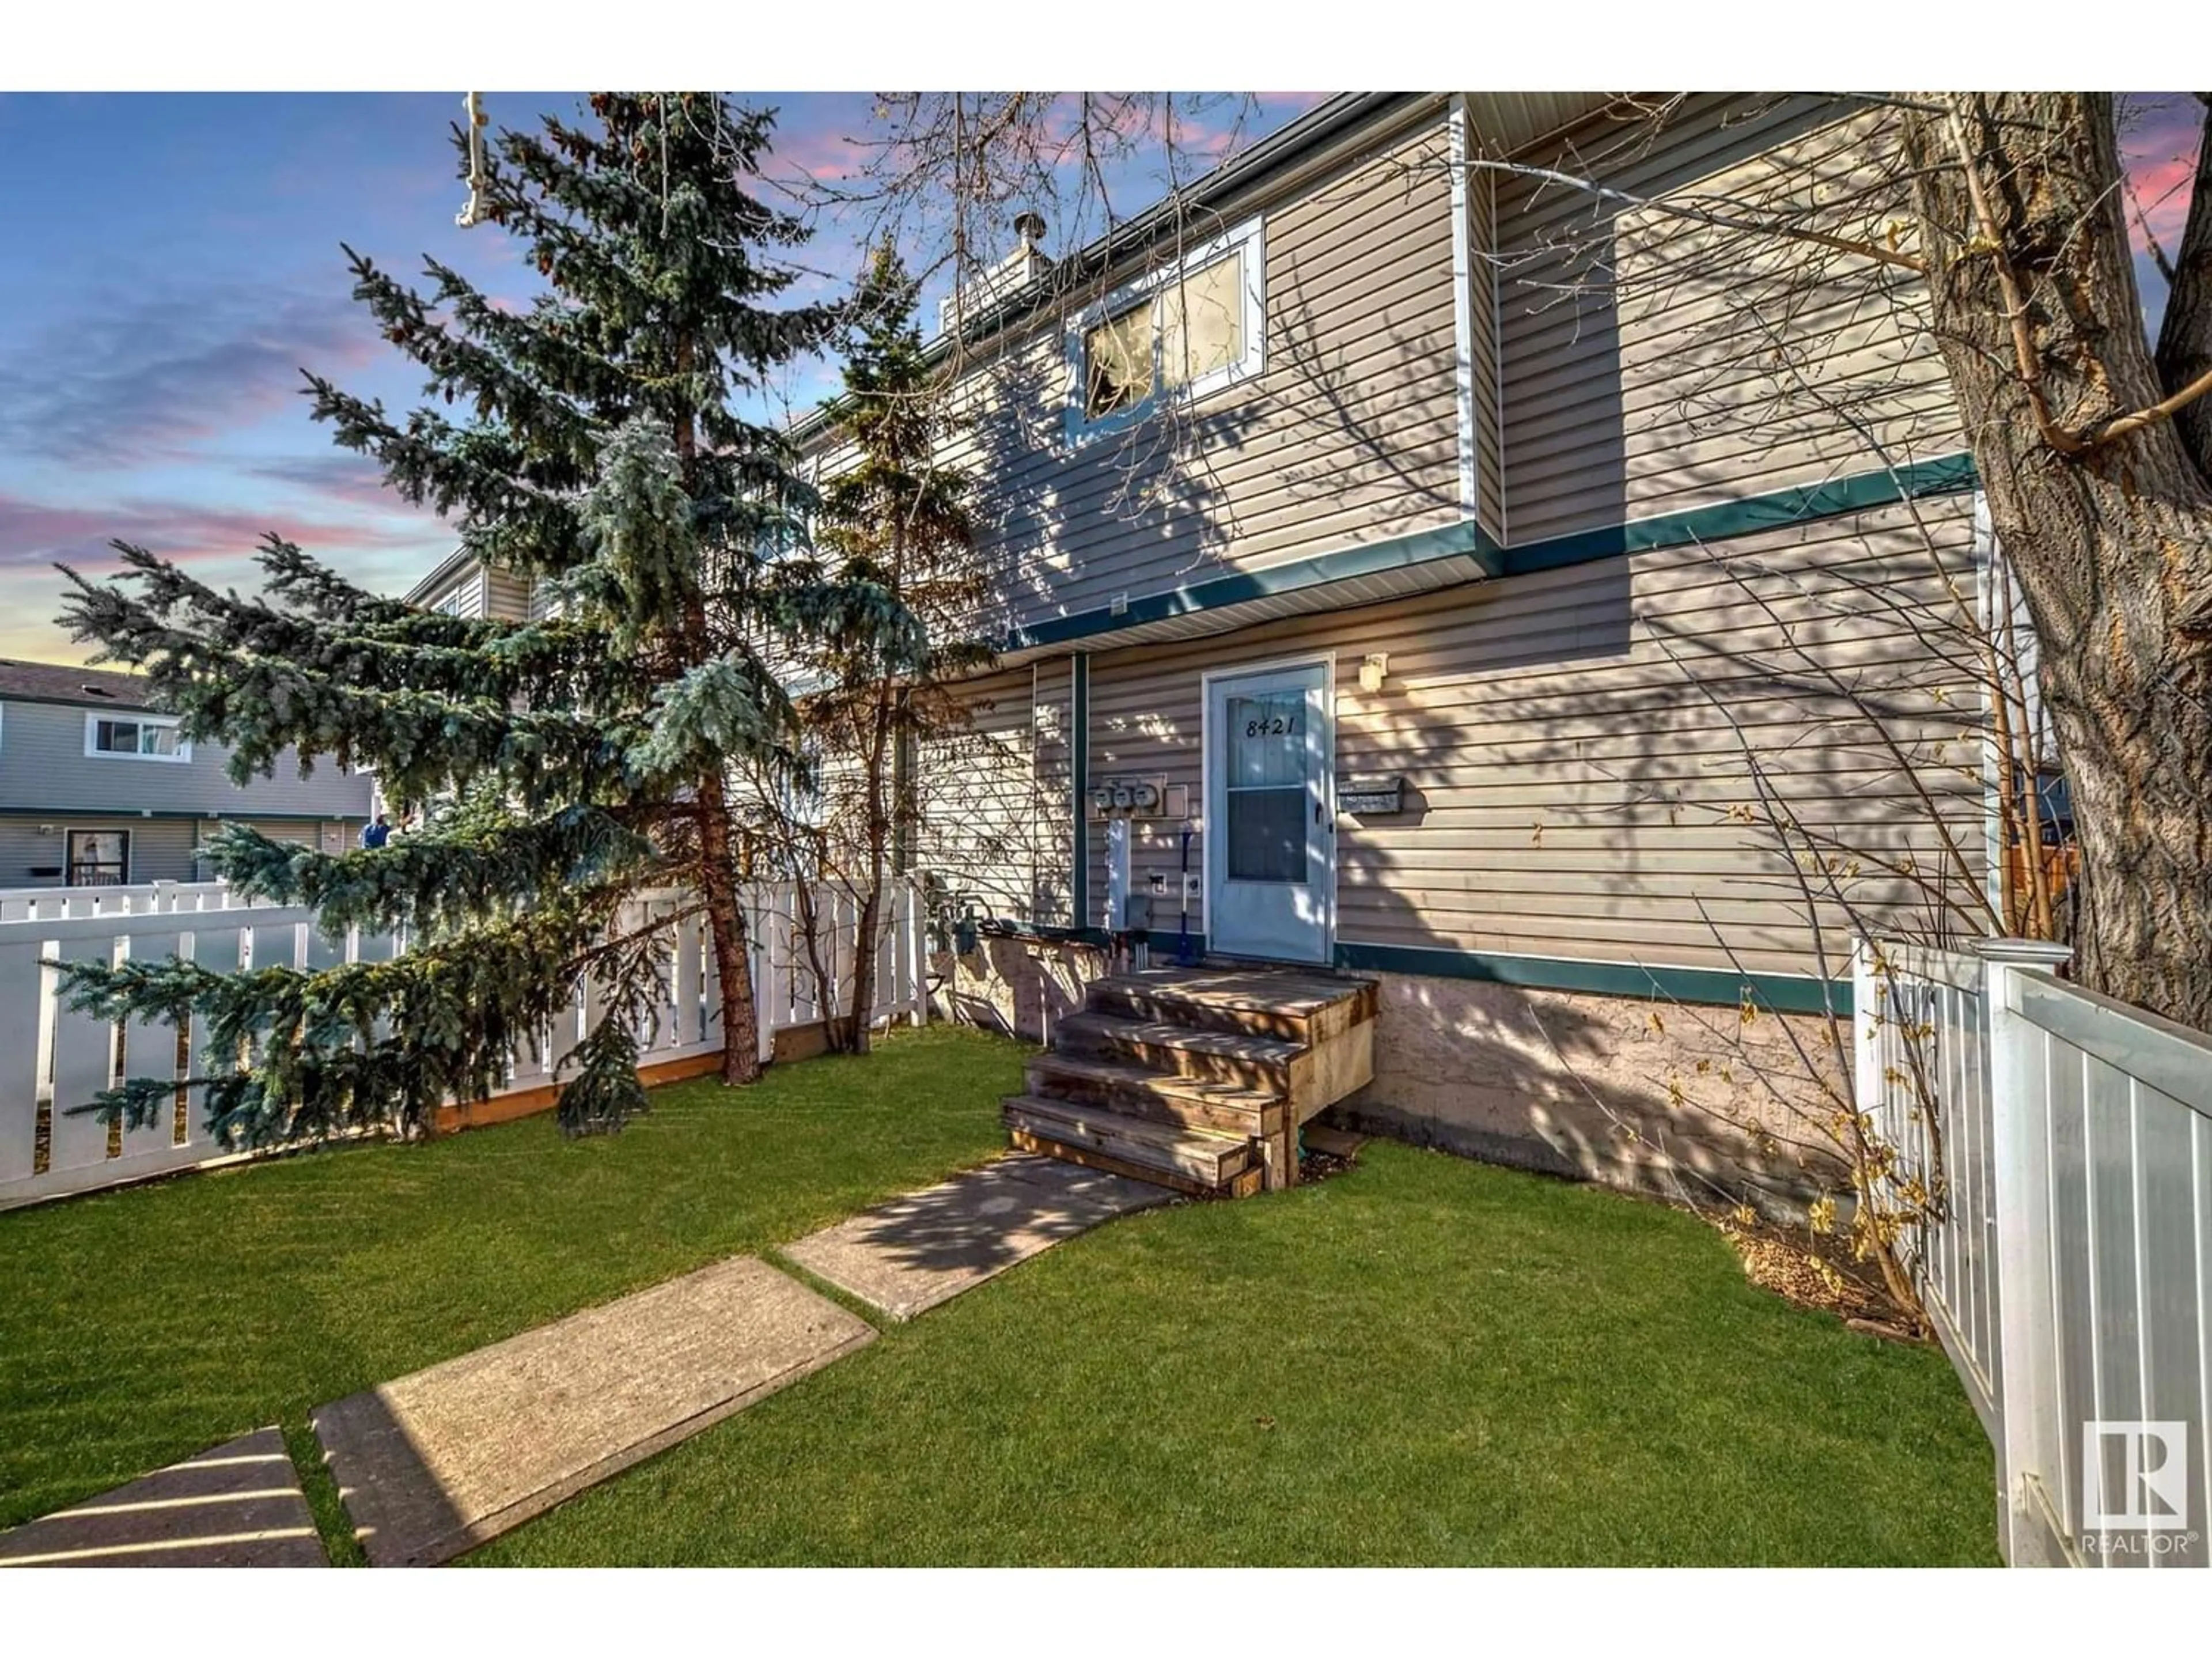 A pic from exterior of the house or condo for 8421 29 AV NW, Edmonton Alberta T6K3M8